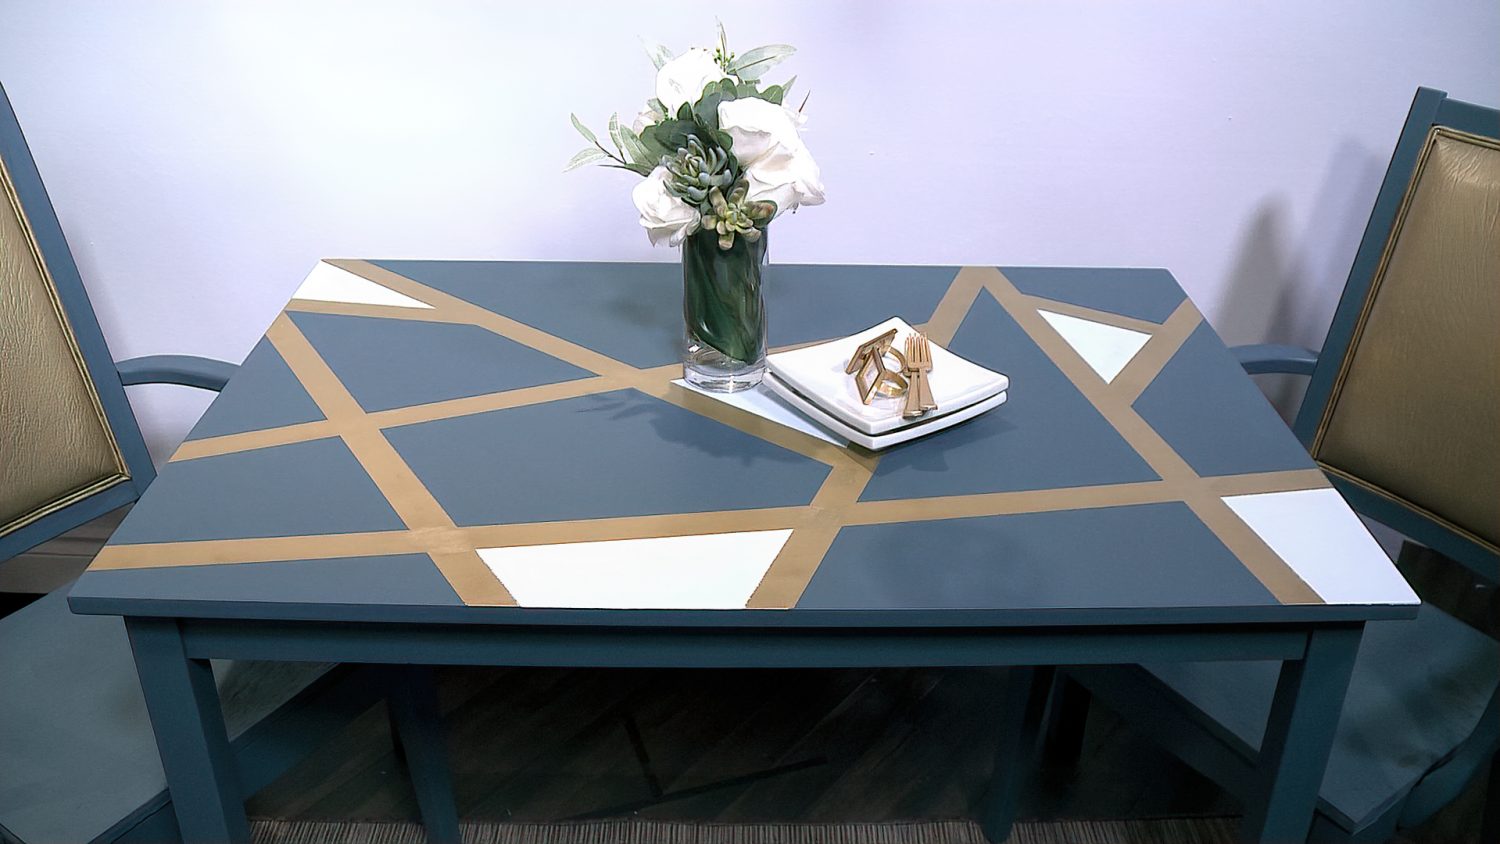 Polished dizzy Tremendous DIY: Geometric Design Table Top - Marc and Mandy Show